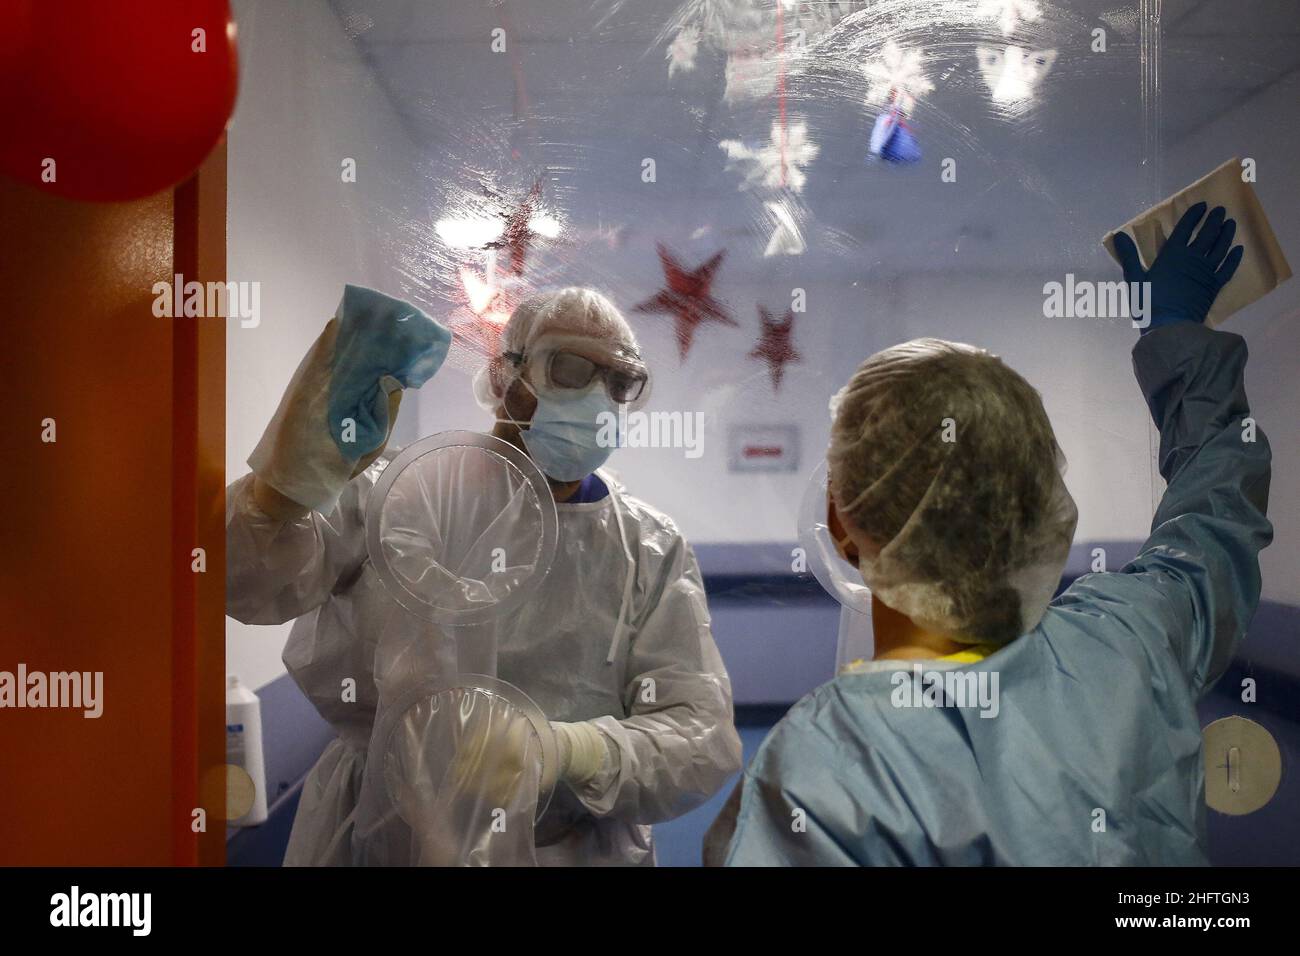 Cecilia Fabiano/LaPresse January 14 , 2021 Roma (Italy) News: The embrace tent at the New Castelli&#x2019;s Hospital allows patients to have contact with family members during the Covid hospitalization period In the Pic : The embrace tent cleaned by medical staff Stock Photo